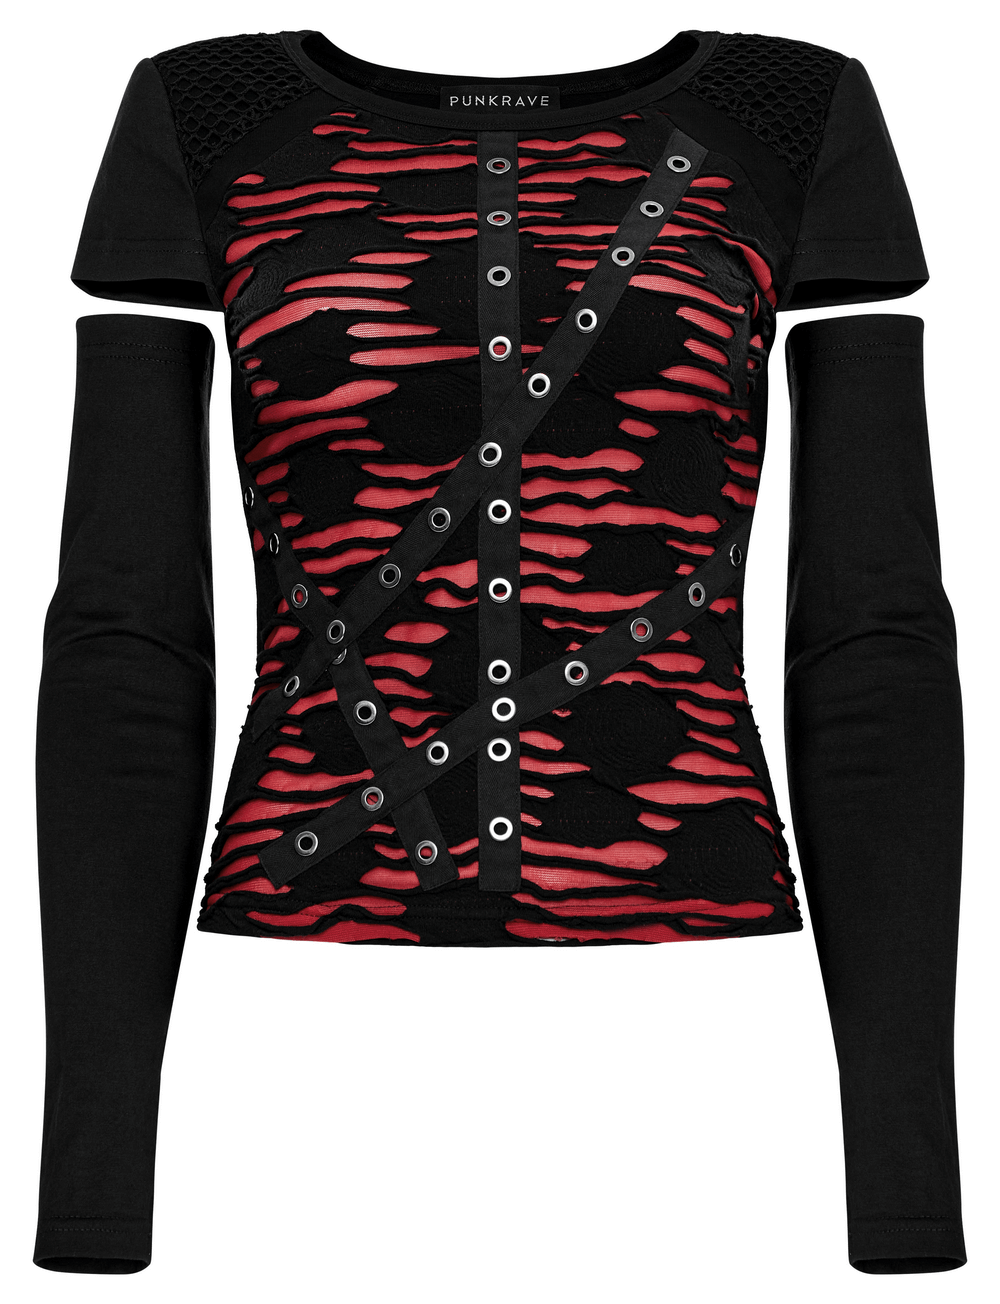 Red and Black Striped Punk Top with Separate Sleeves